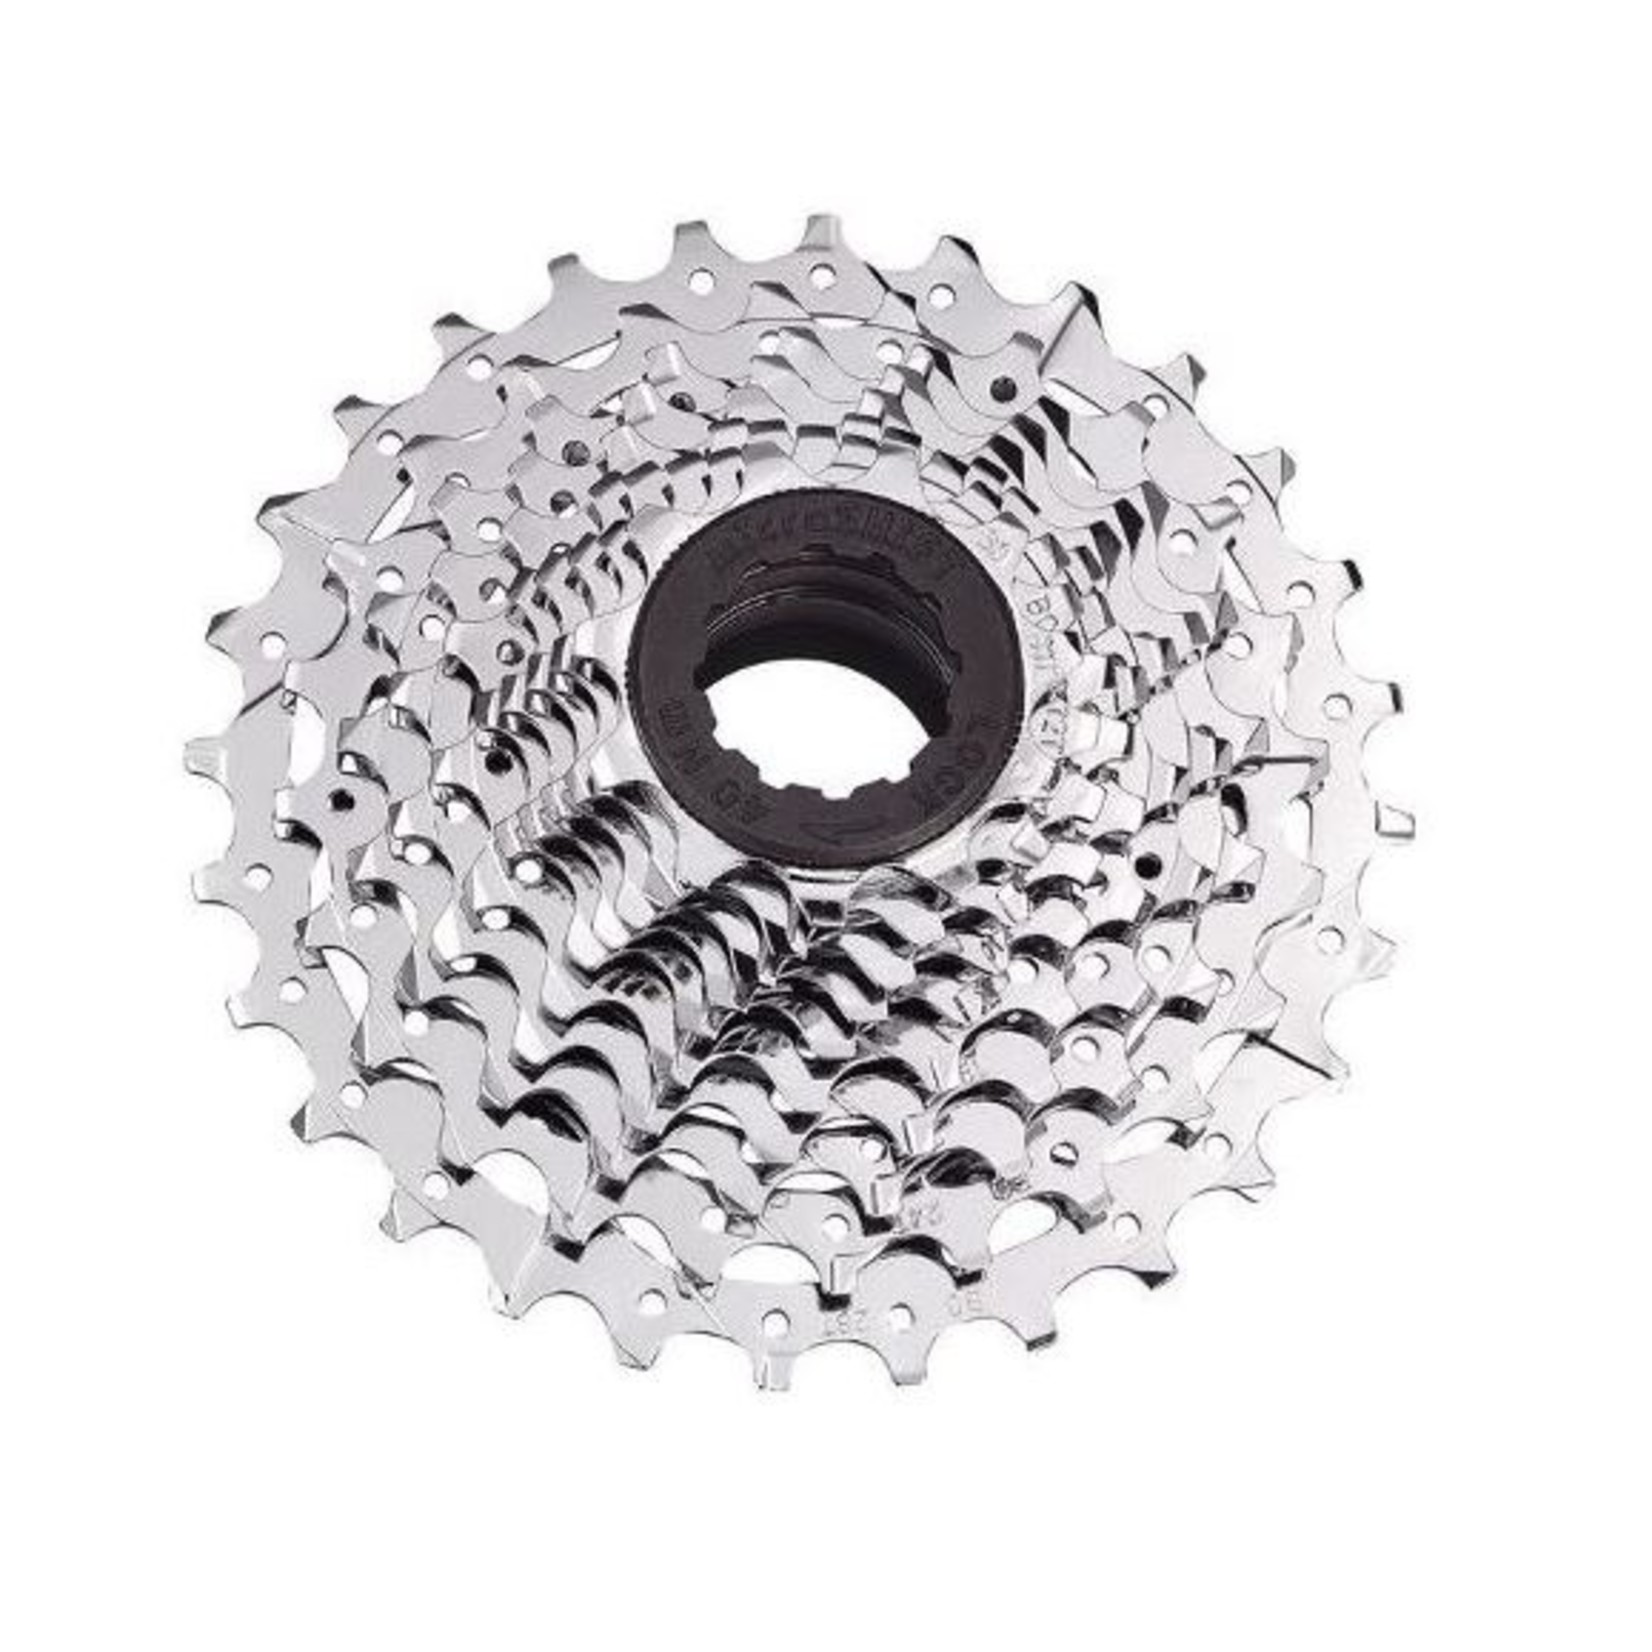 Microshift Microshift Bicycle Cassette - R10 Cs-H100 - 10 Speed - 11-25T - Silver